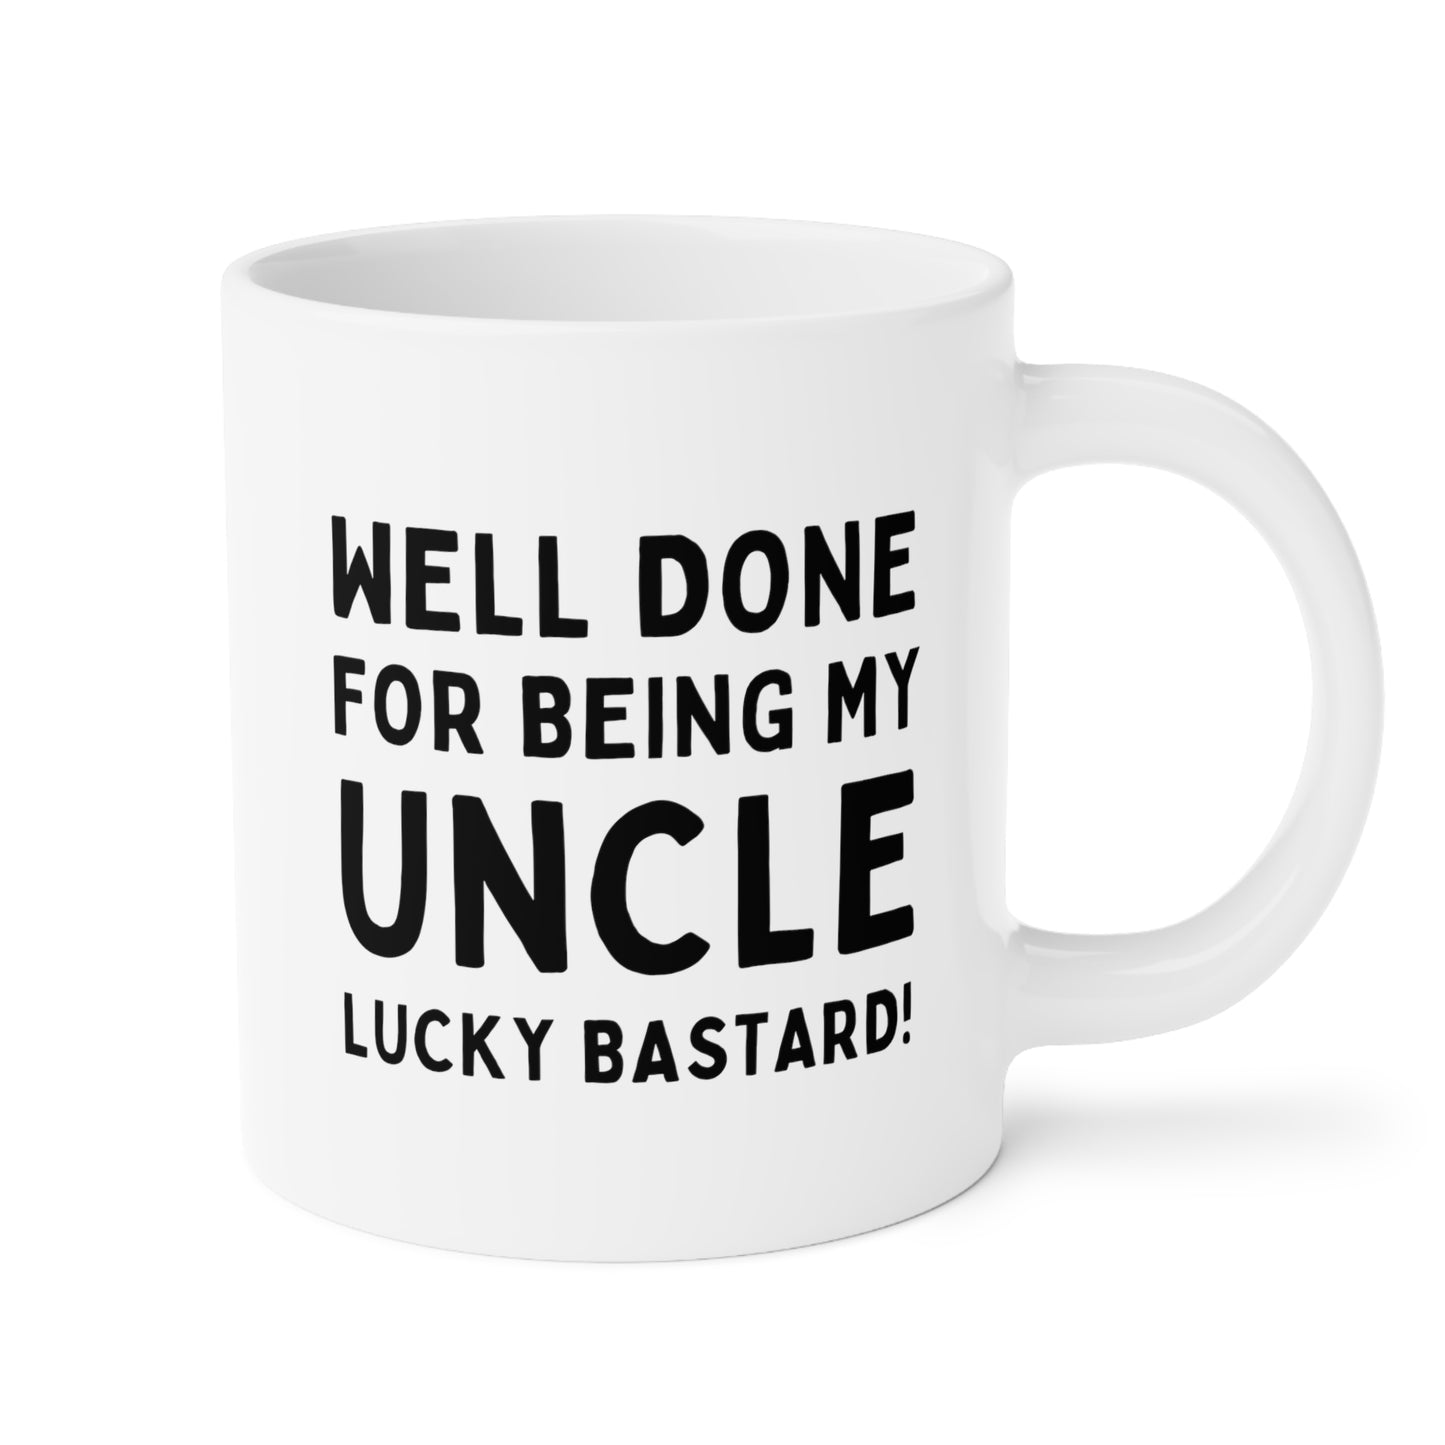 Well Done For Being My Uncle Lucky Bastard 20oz white funny large coffee mug gift for uncle congrats birthday christmas waveywares wavey wares wavywares wavy wares